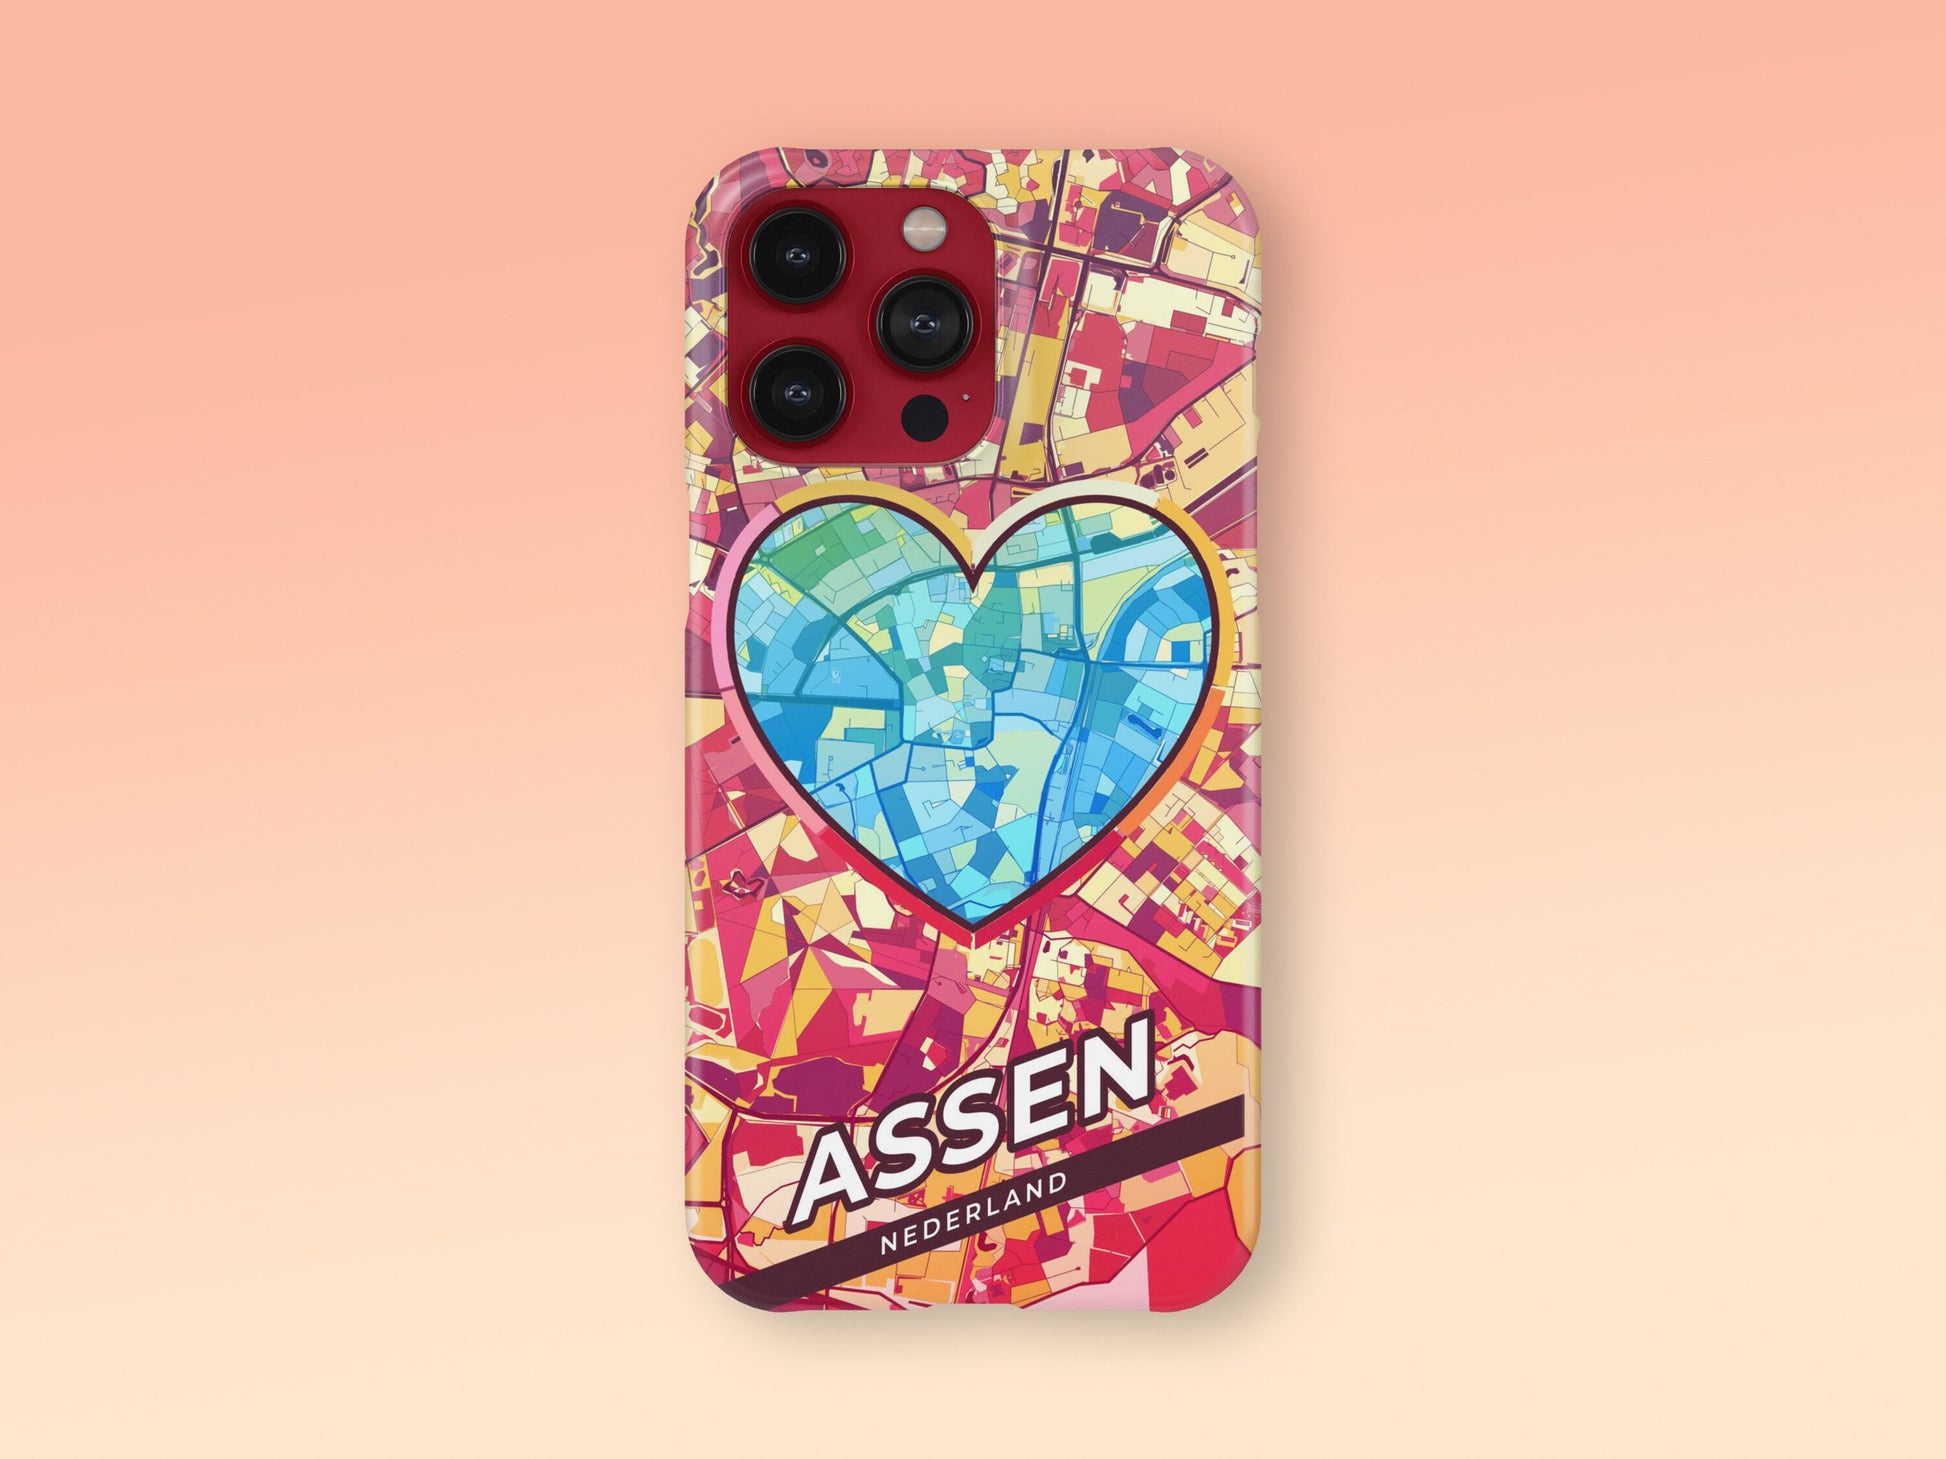 Assen Netherlands slim phone case with colorful icon. Birthday, wedding or housewarming gift. Couple match cases. 2